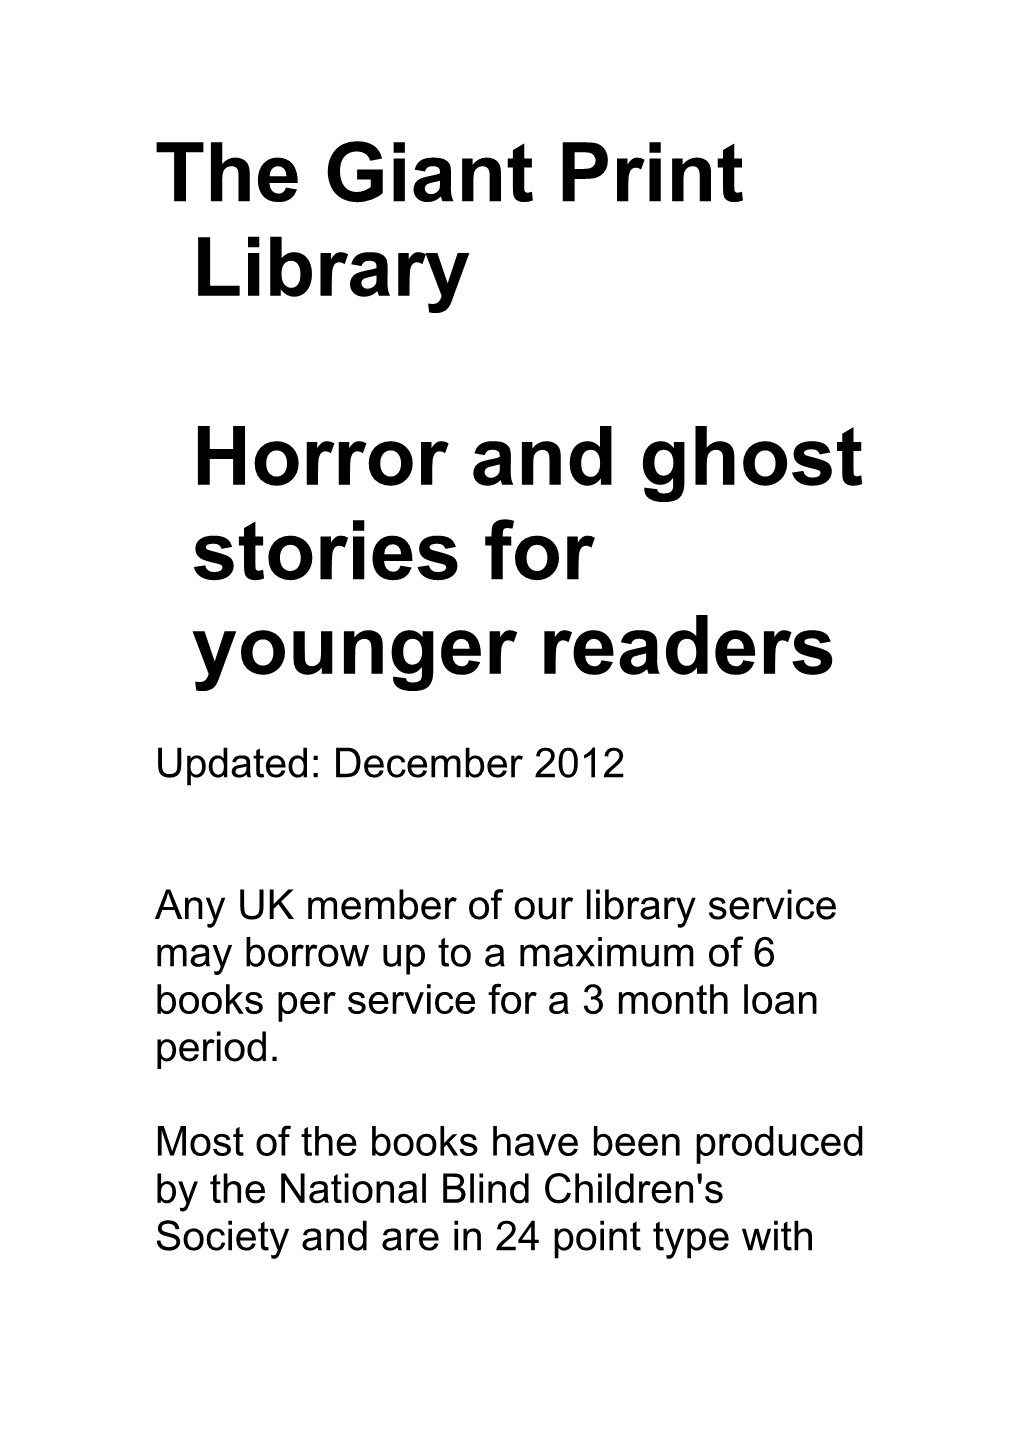 Horror Stories for Younger Readers in Giant Print (Word, 200KB)